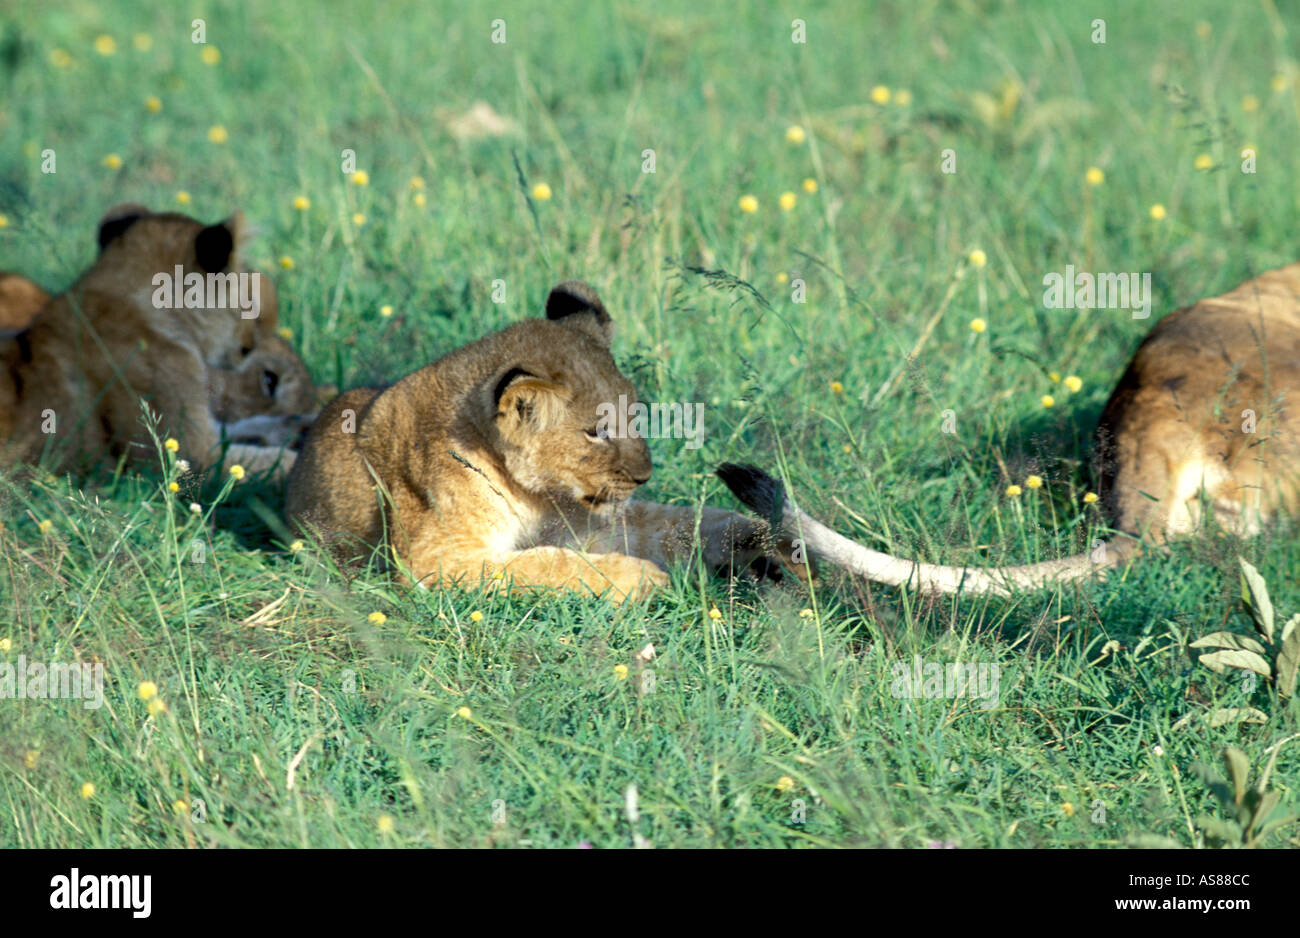 Lion cub playing with mother's tail Masai Mara National Reserve Kenya Africa Stock Photo